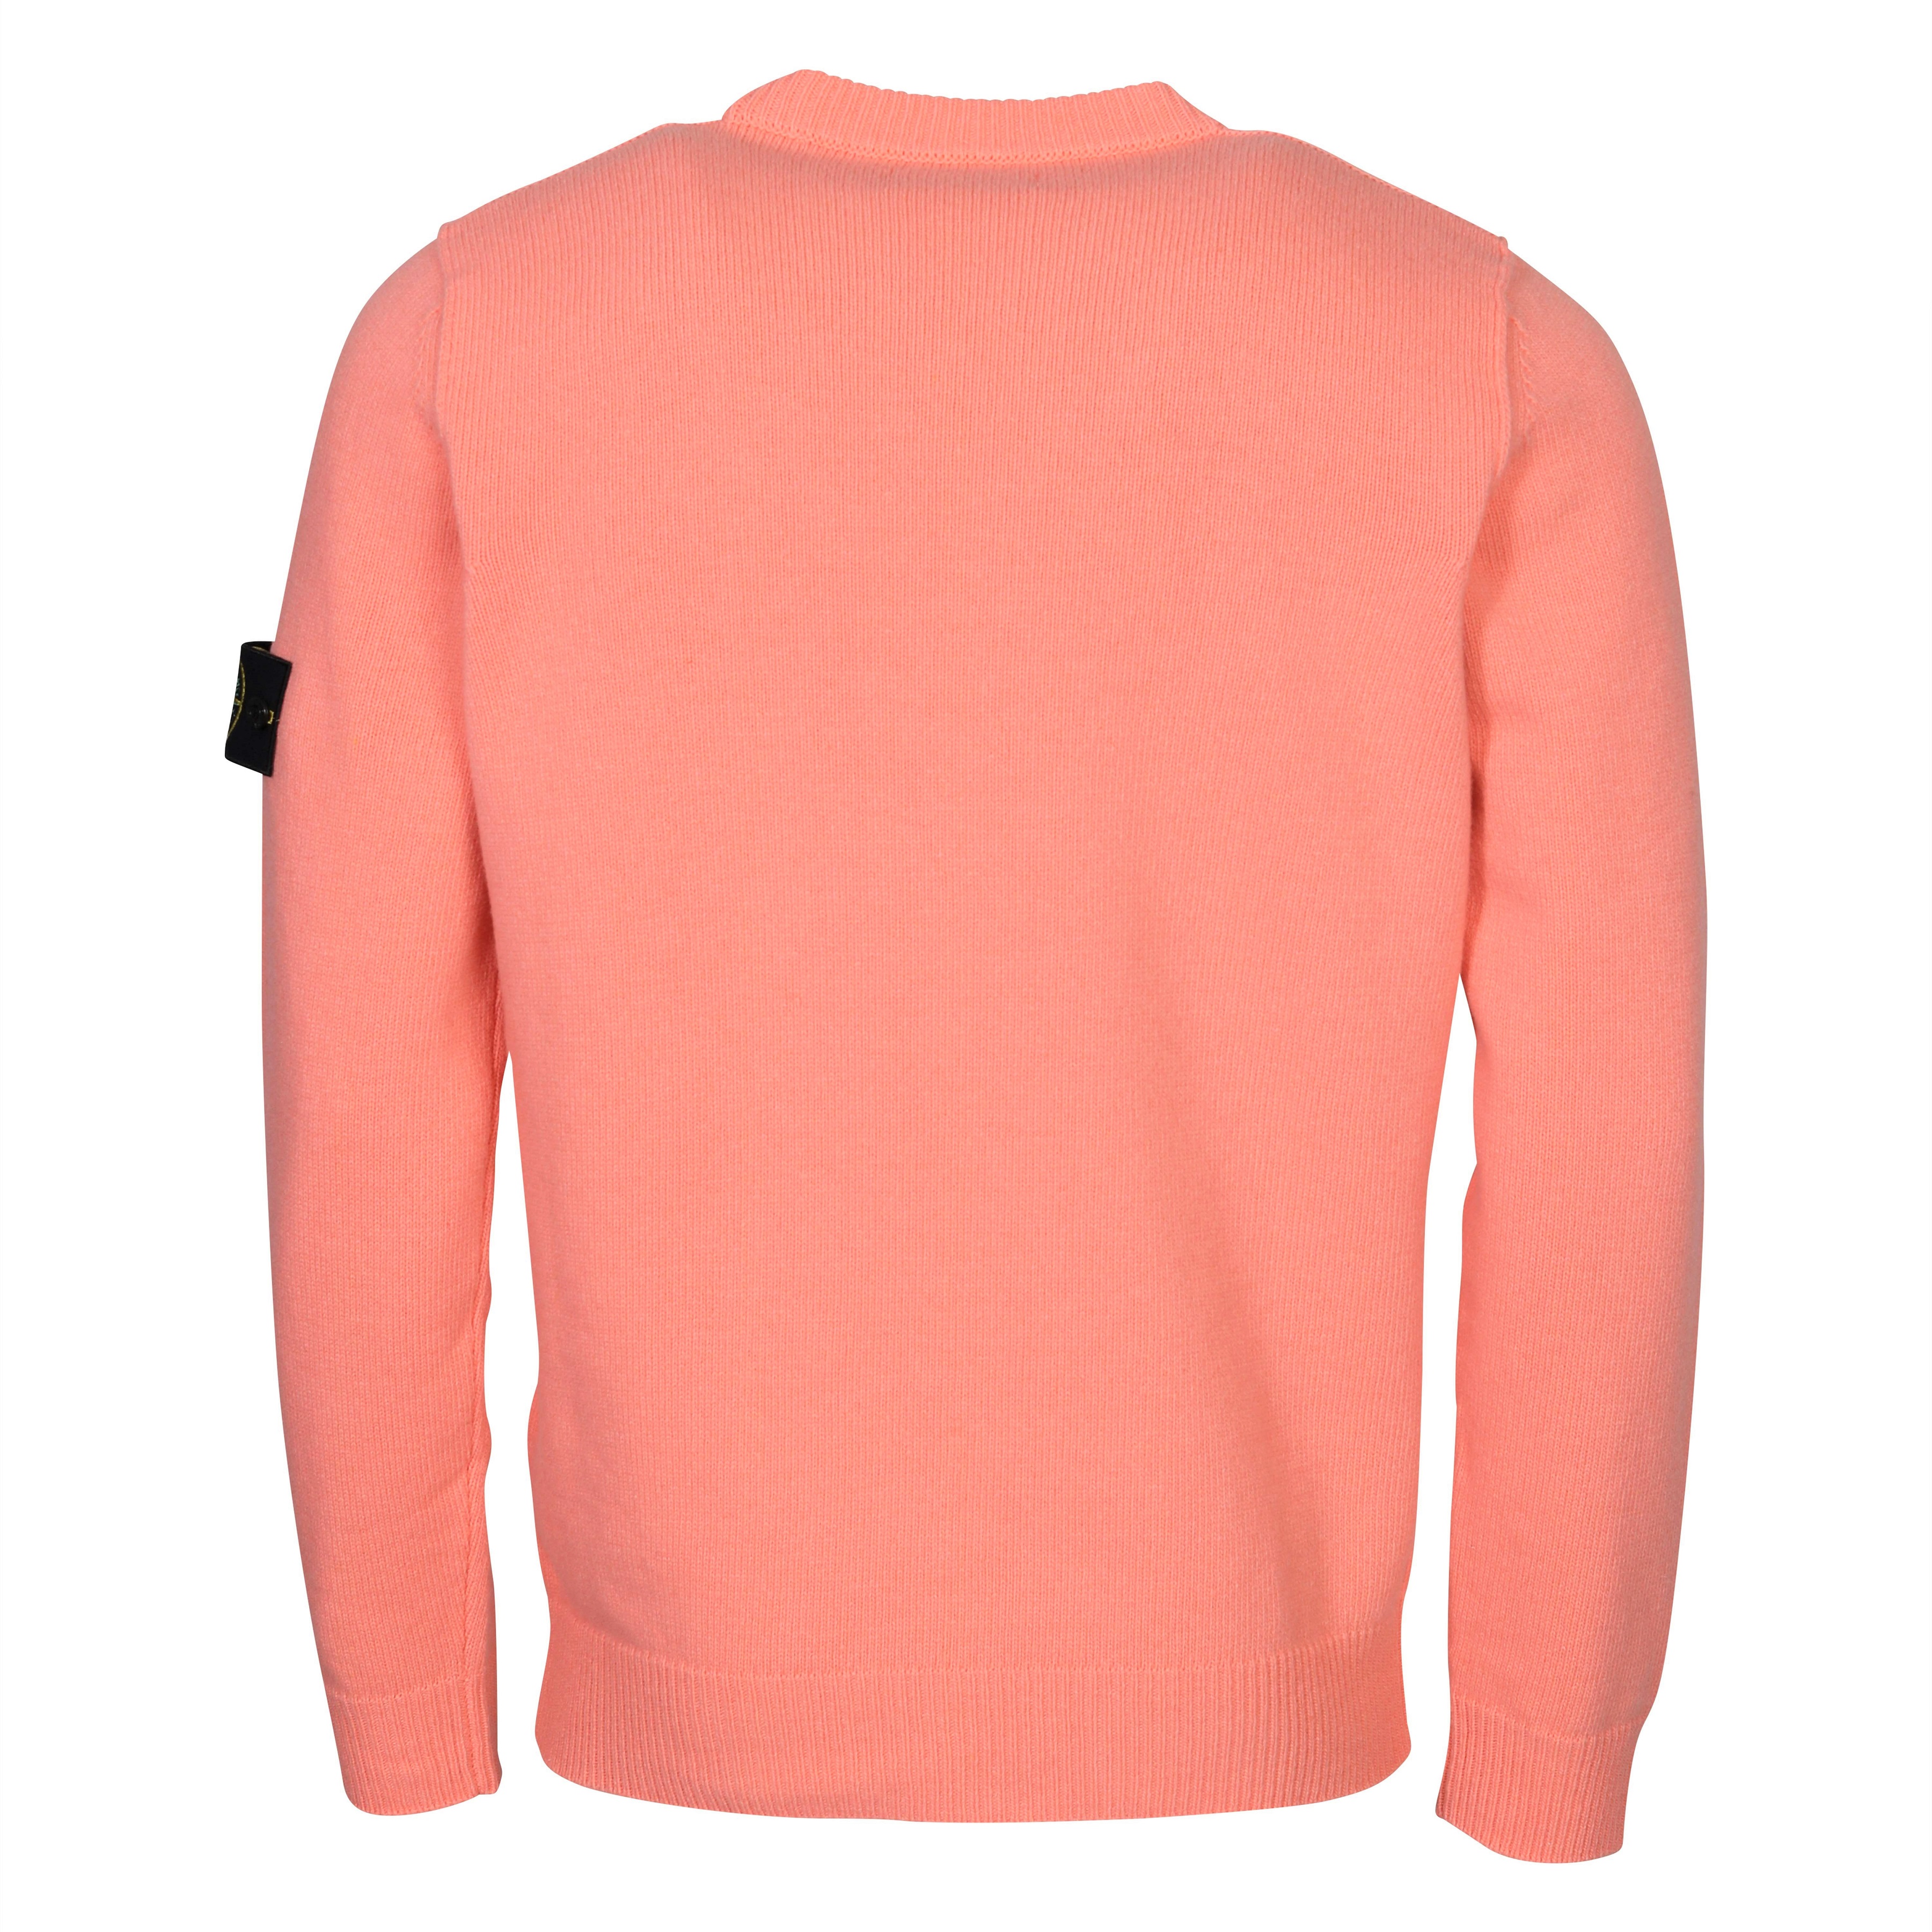 Stone Island Knit Sweater in Coral